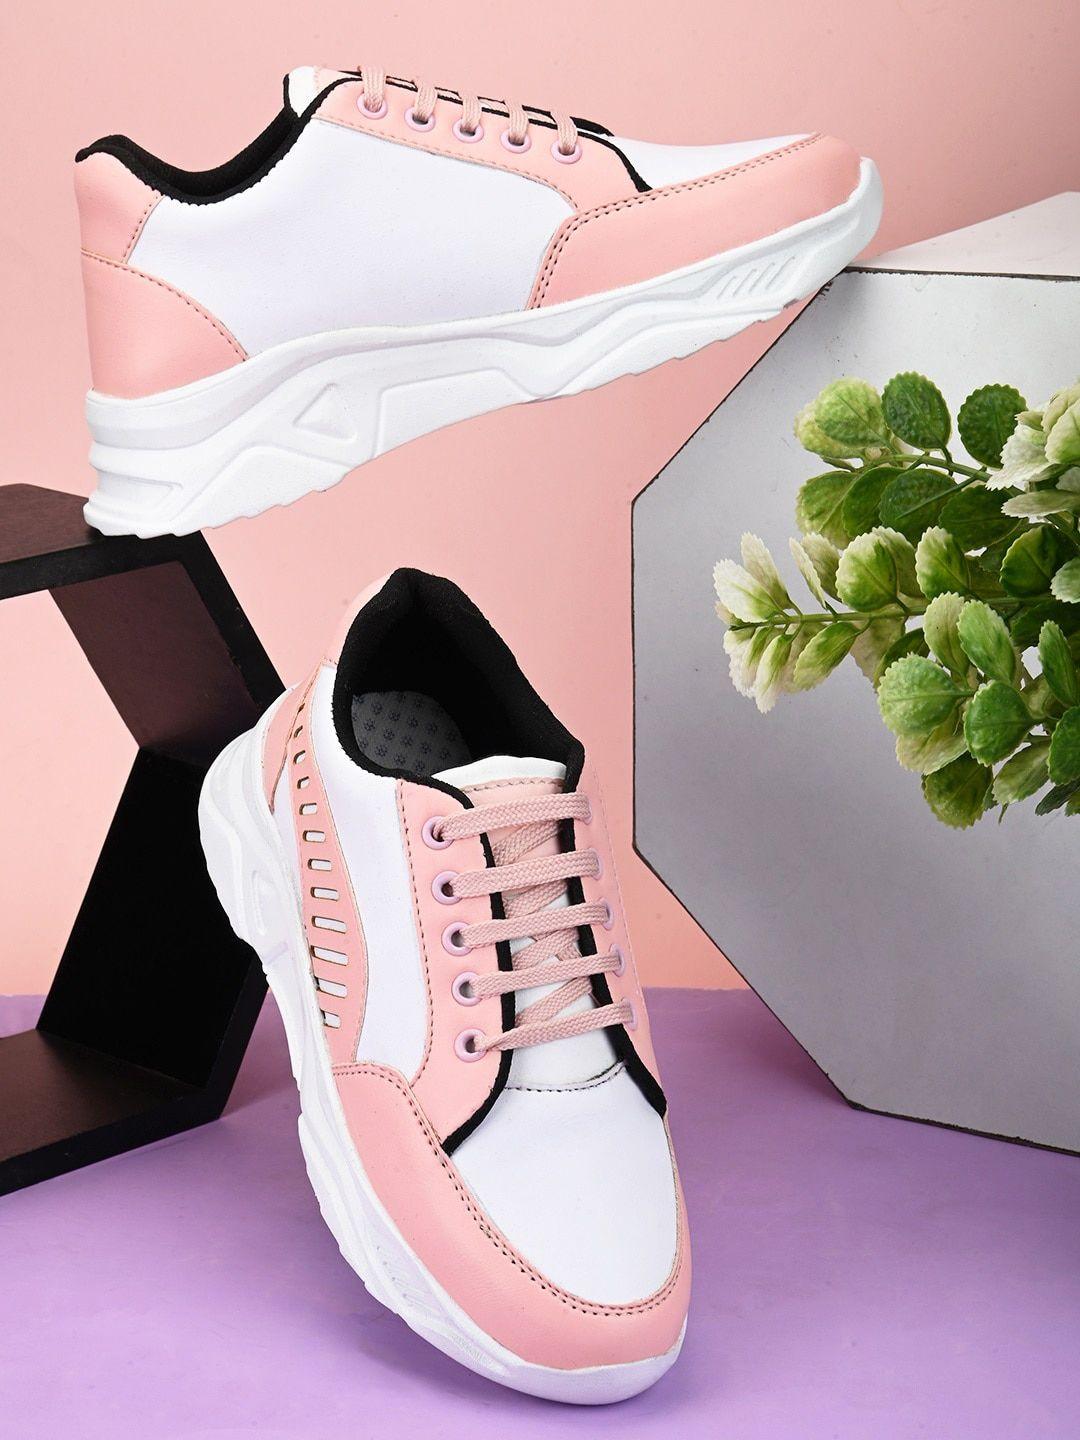 roadster-women-pink-&-white-colourblocked-lightweight-athletic-insole-sneakers